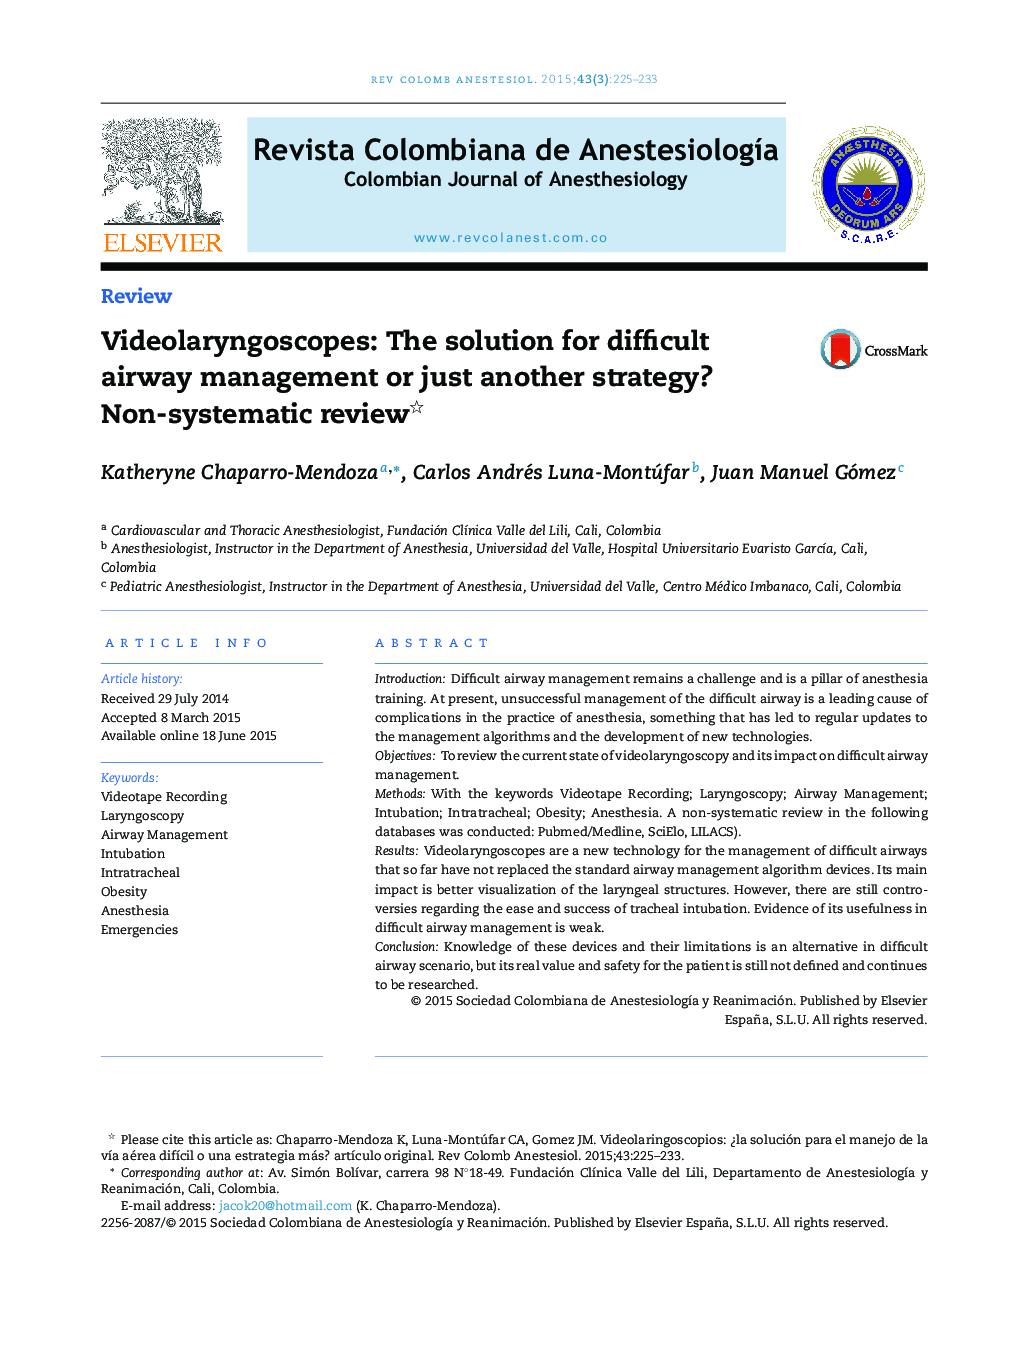 Videolaryngoscopes: The solution for difficult airway management or just another strategy? Non-systematic review